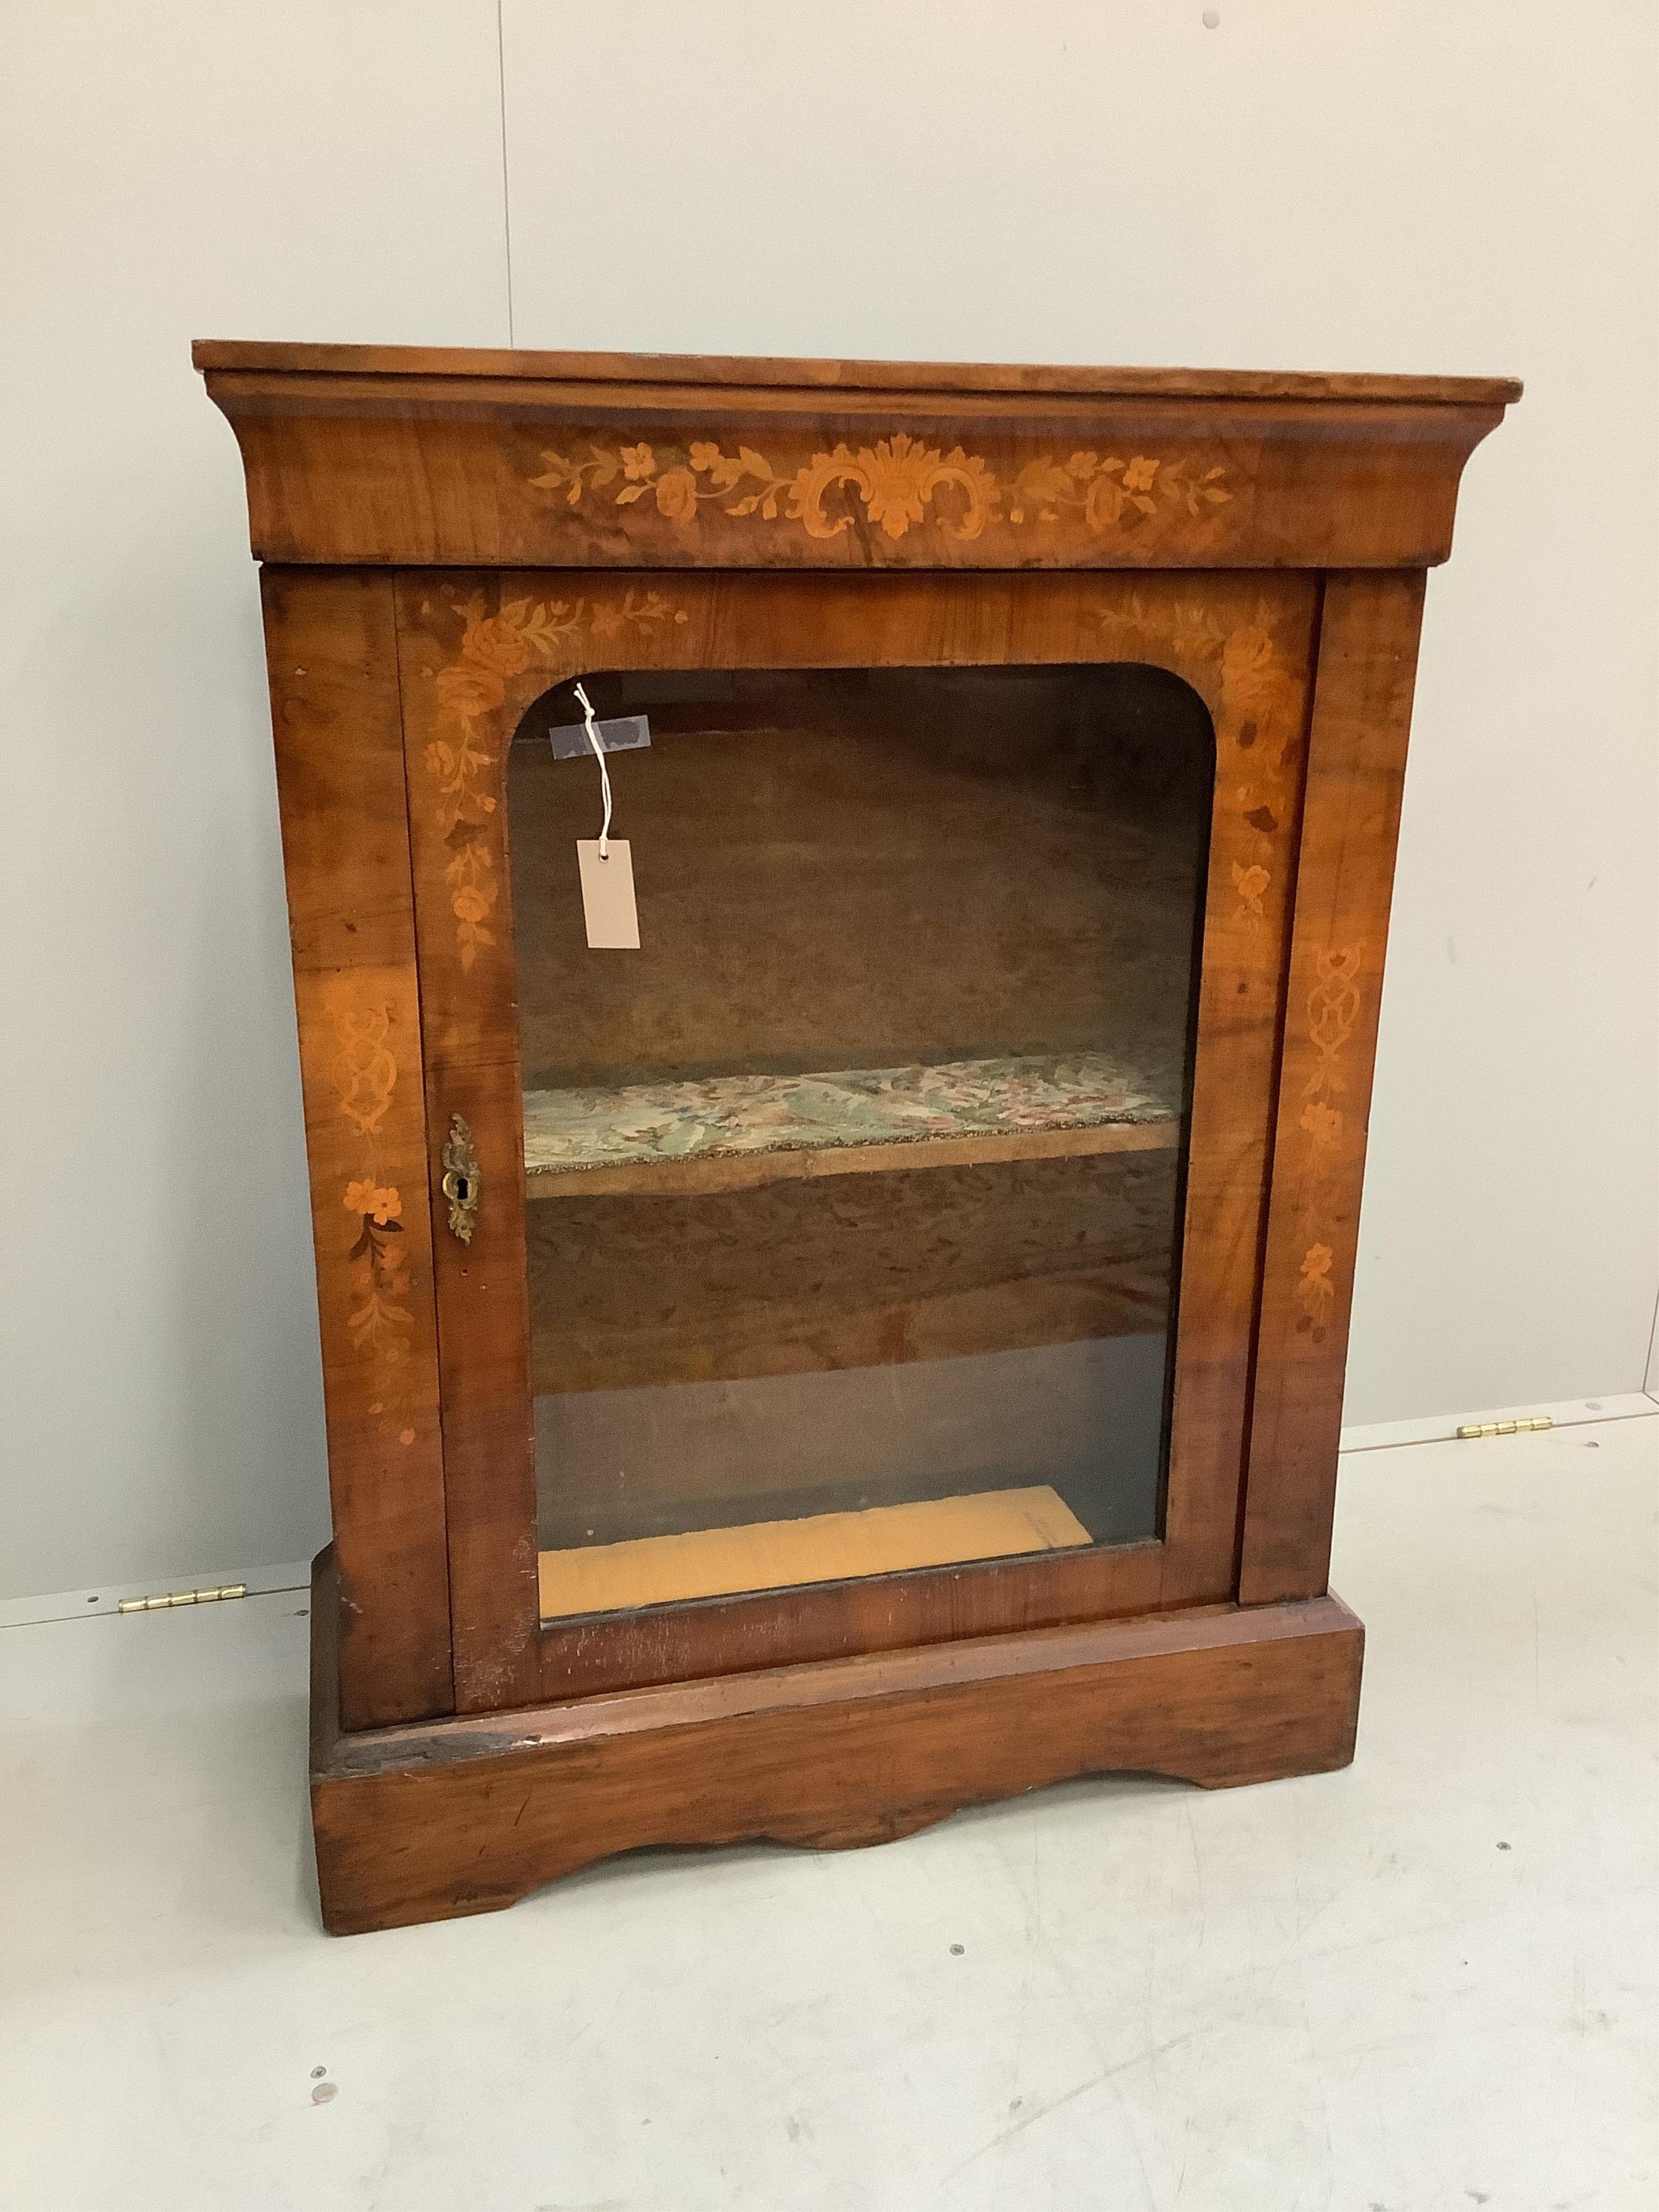 A Victorian walnut and marquetry inlaid pier cabinet, width 80cm, depth 32cm, height 105cm. Condition - poor